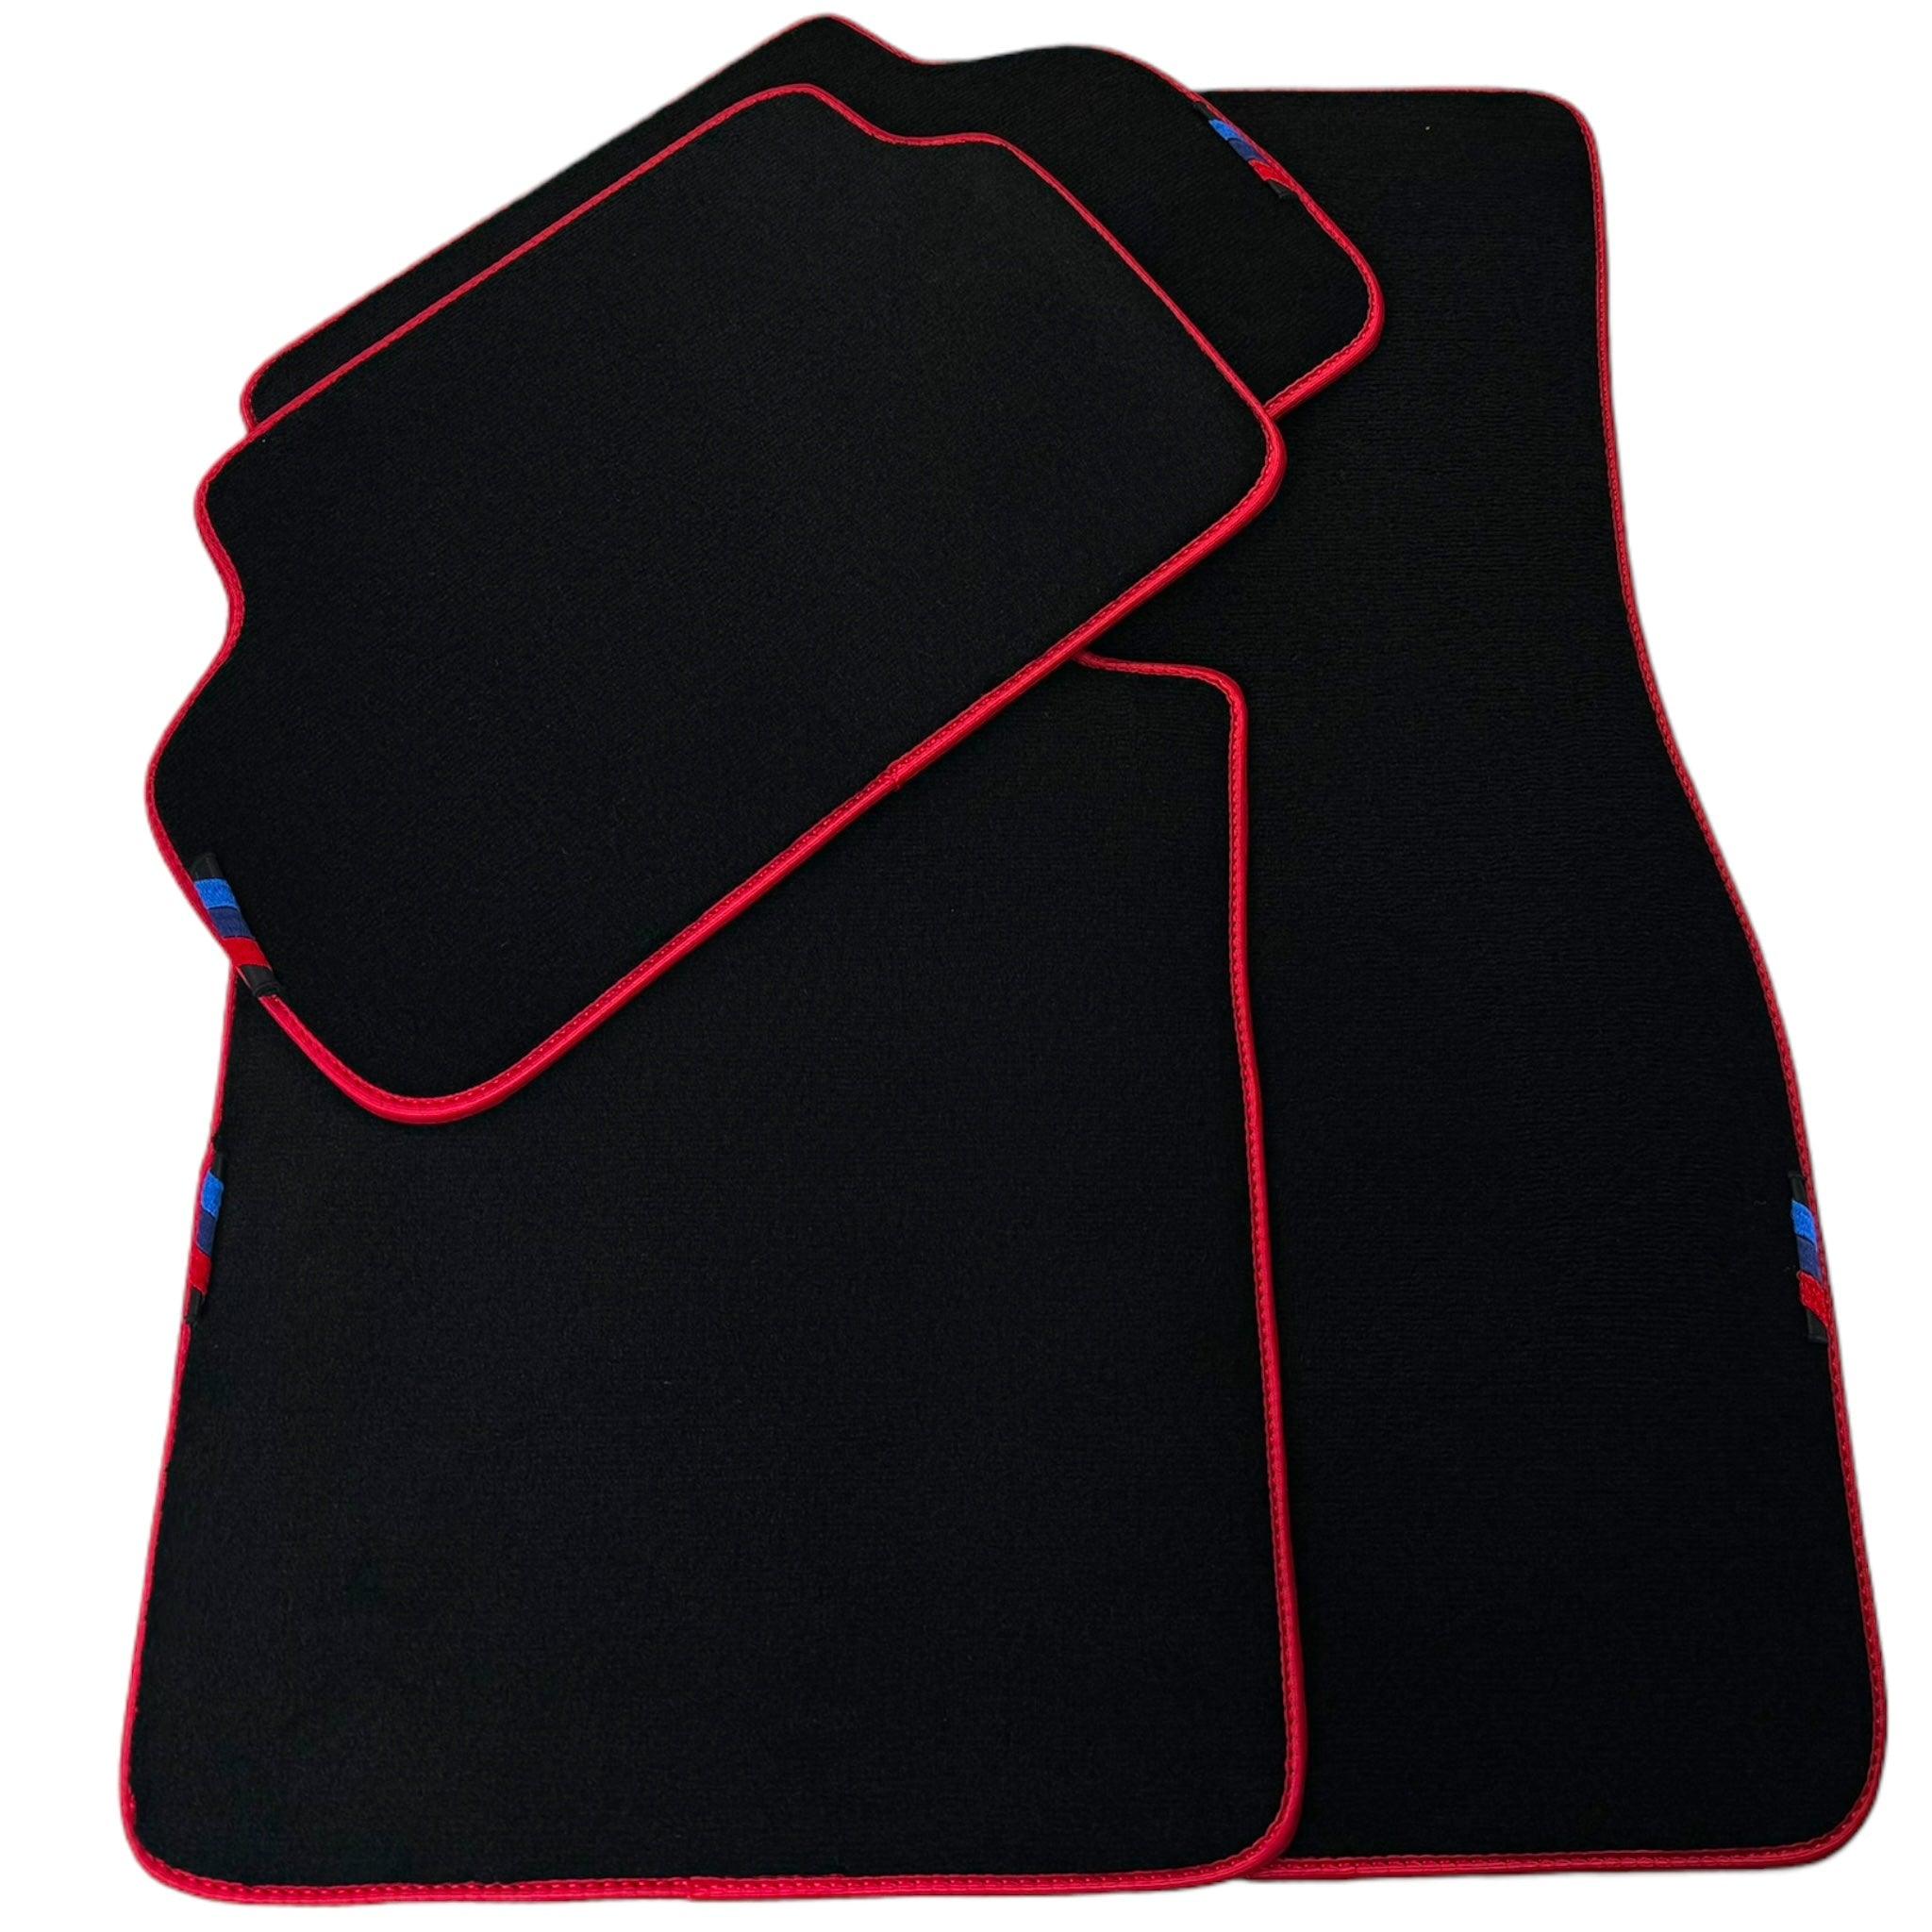 Black Floor Mats For BMW 2 Series F44 Gran Coupe | Red Trim